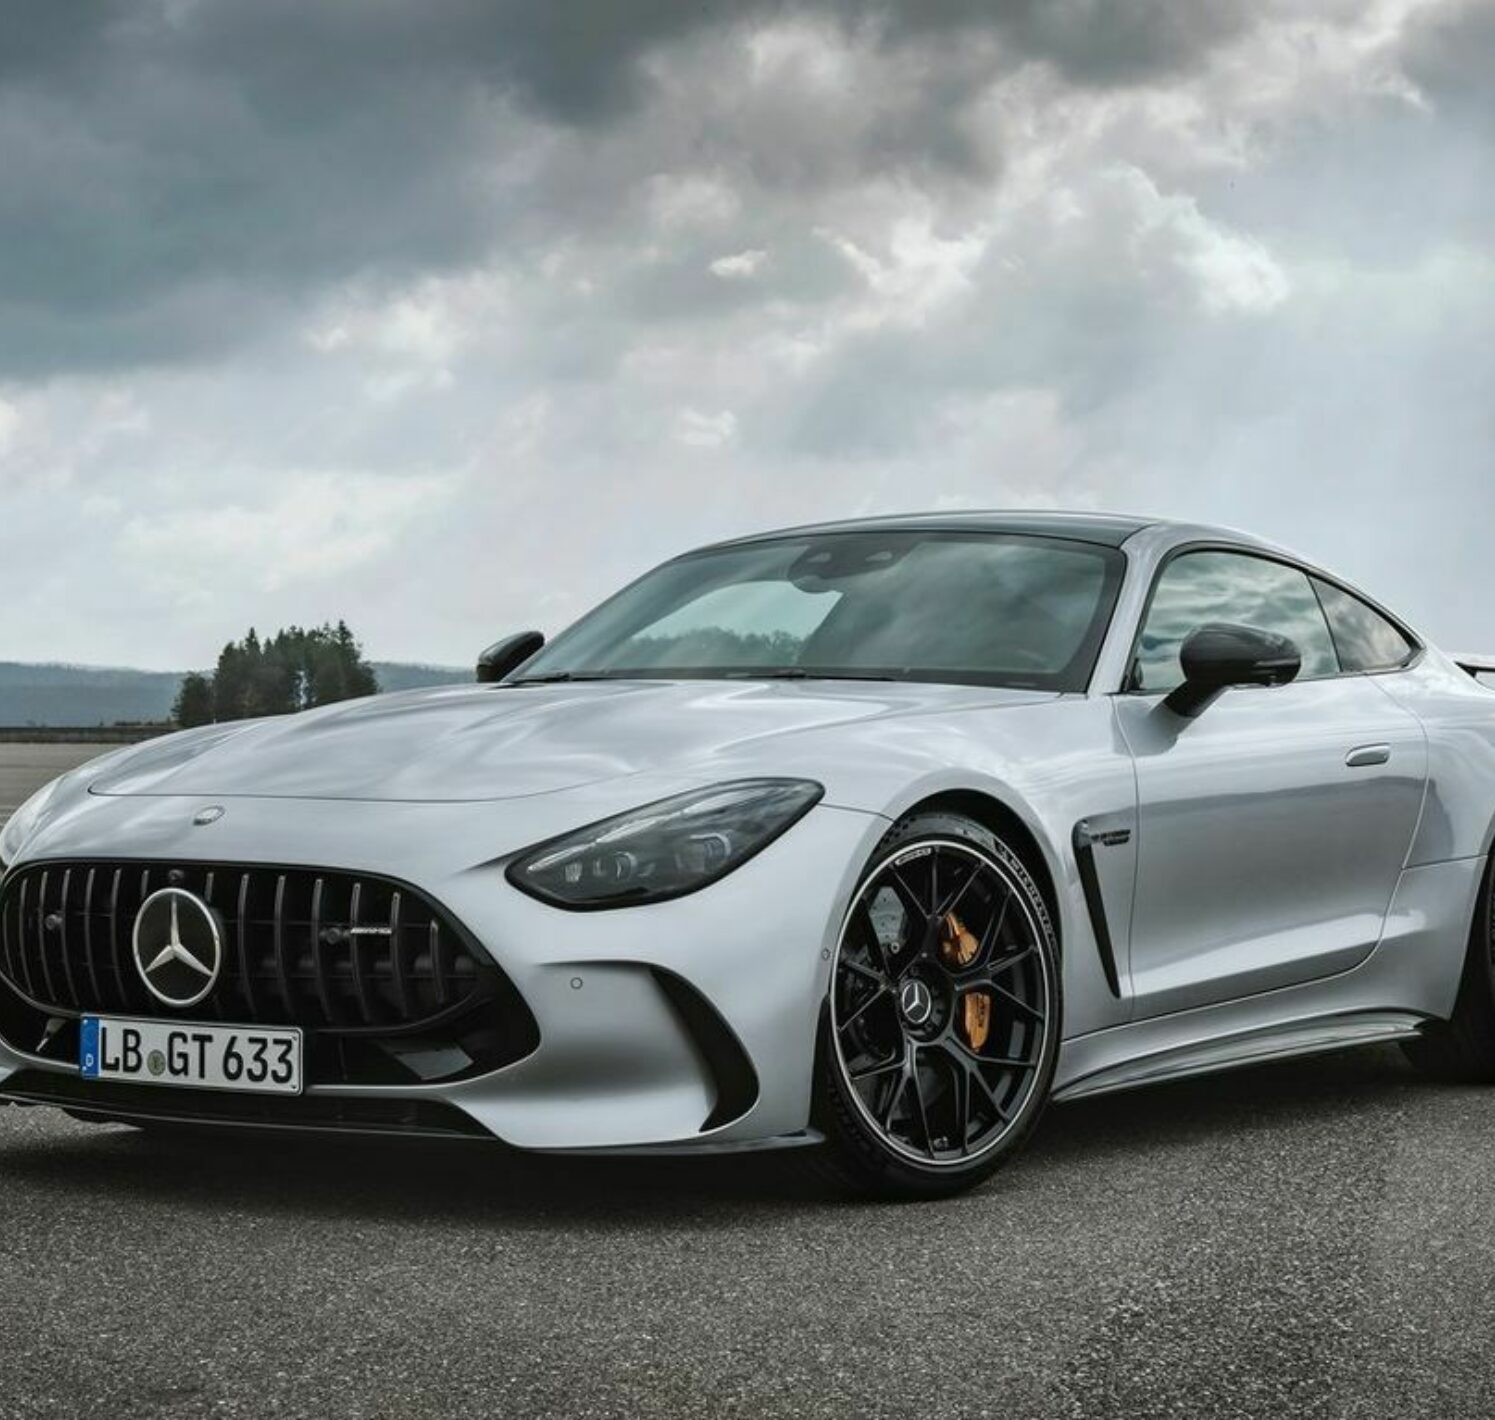 https://autofilter.sk/assets/images/amg-gt-kupe/gallery/mercedes-amg-gt-coupe-galeria.jpg - obrazok